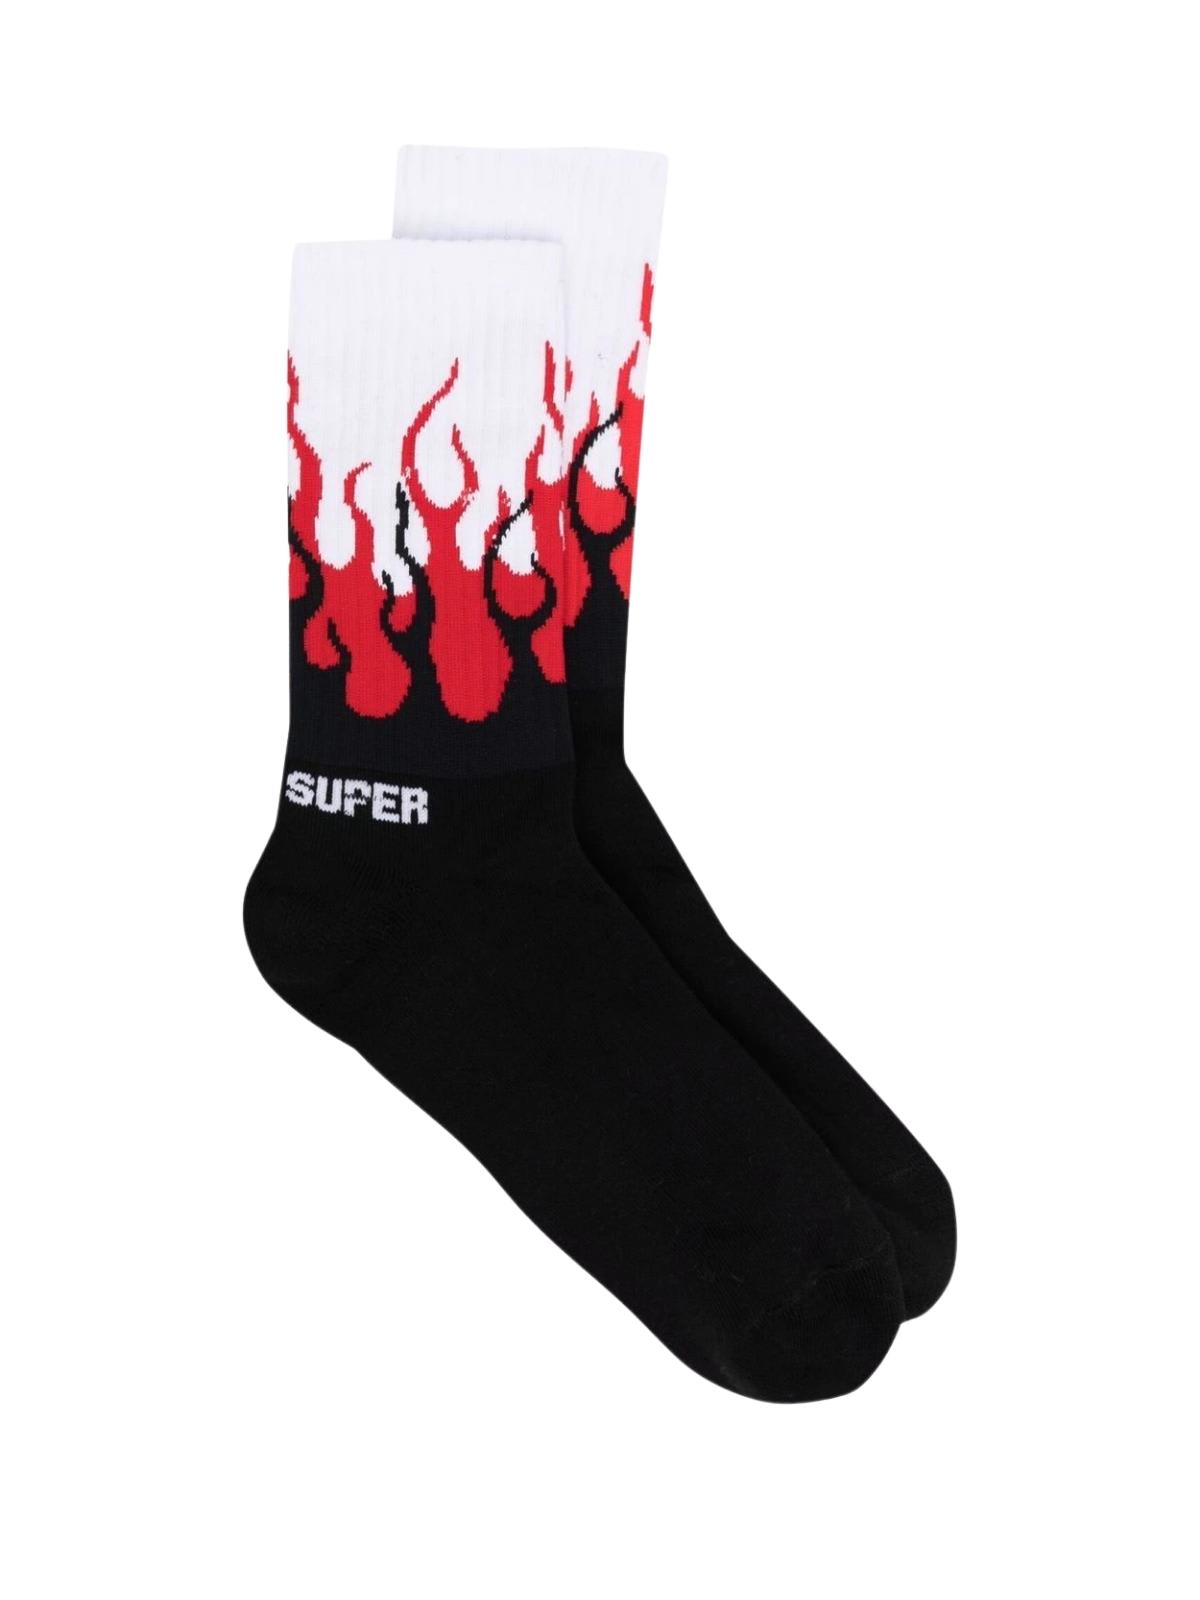 Vision of Super Cotton Red Double Flame Socks